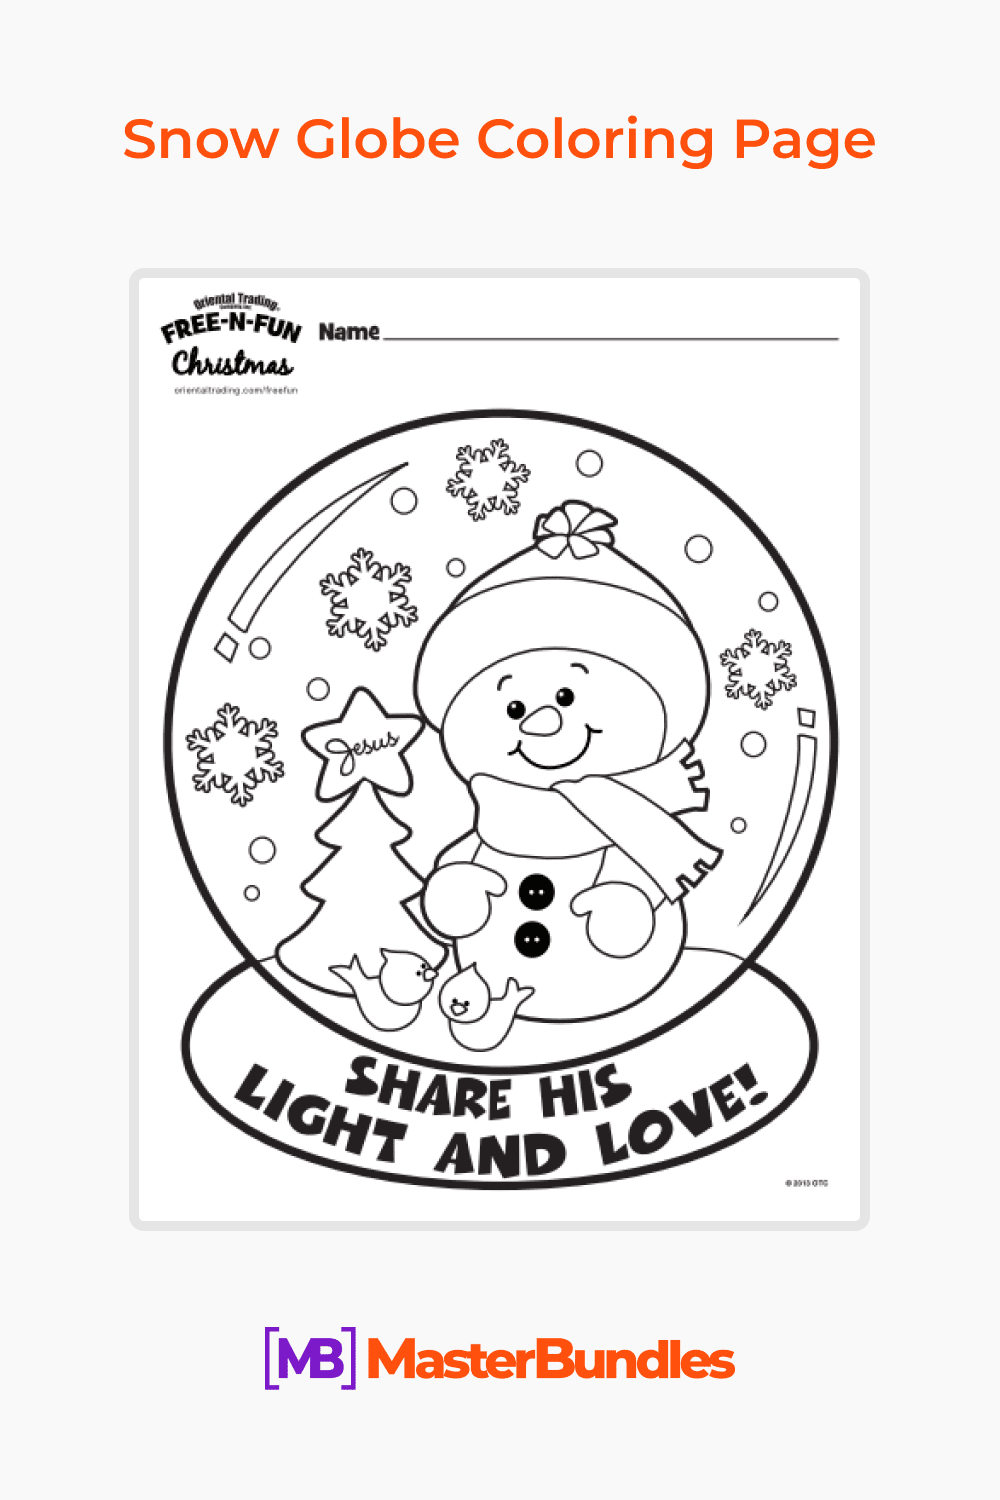 Snow globe coloring page pinterest image.